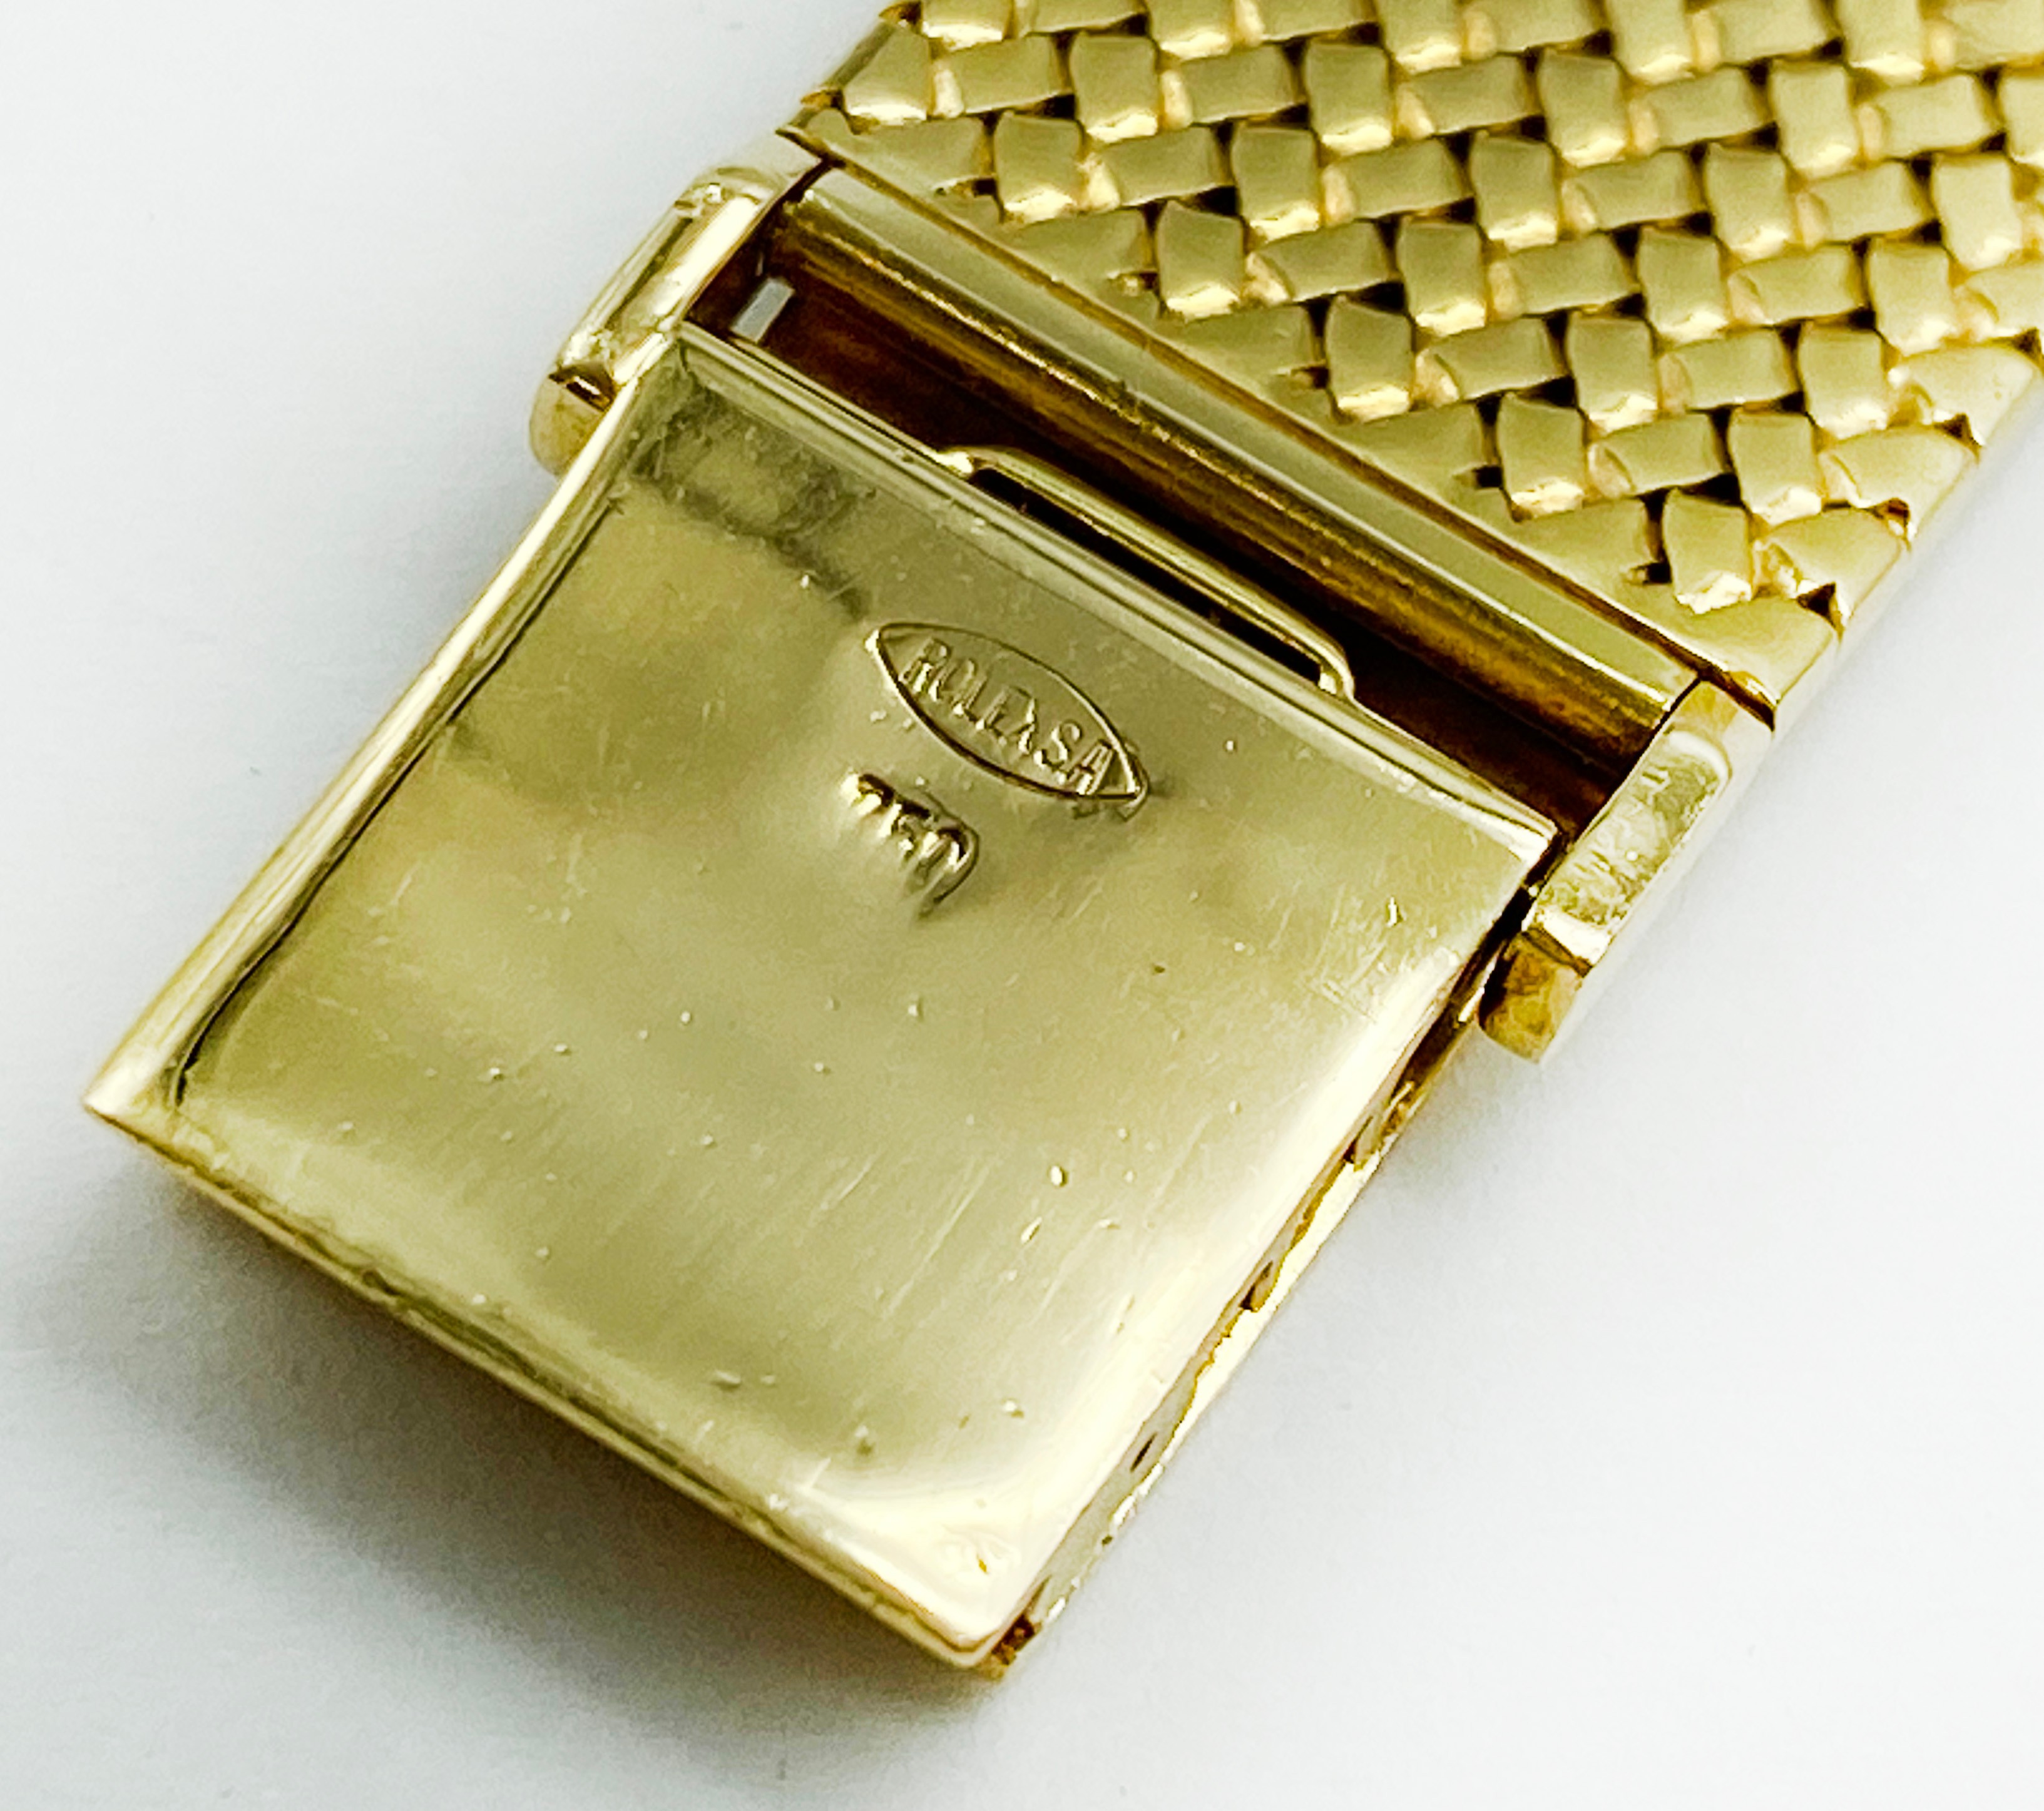 18 CARAT GOLD GENTS ROLEX CELLINI WATCH EXCELLENT CONDITION WORKING ORDER - Image 5 of 6